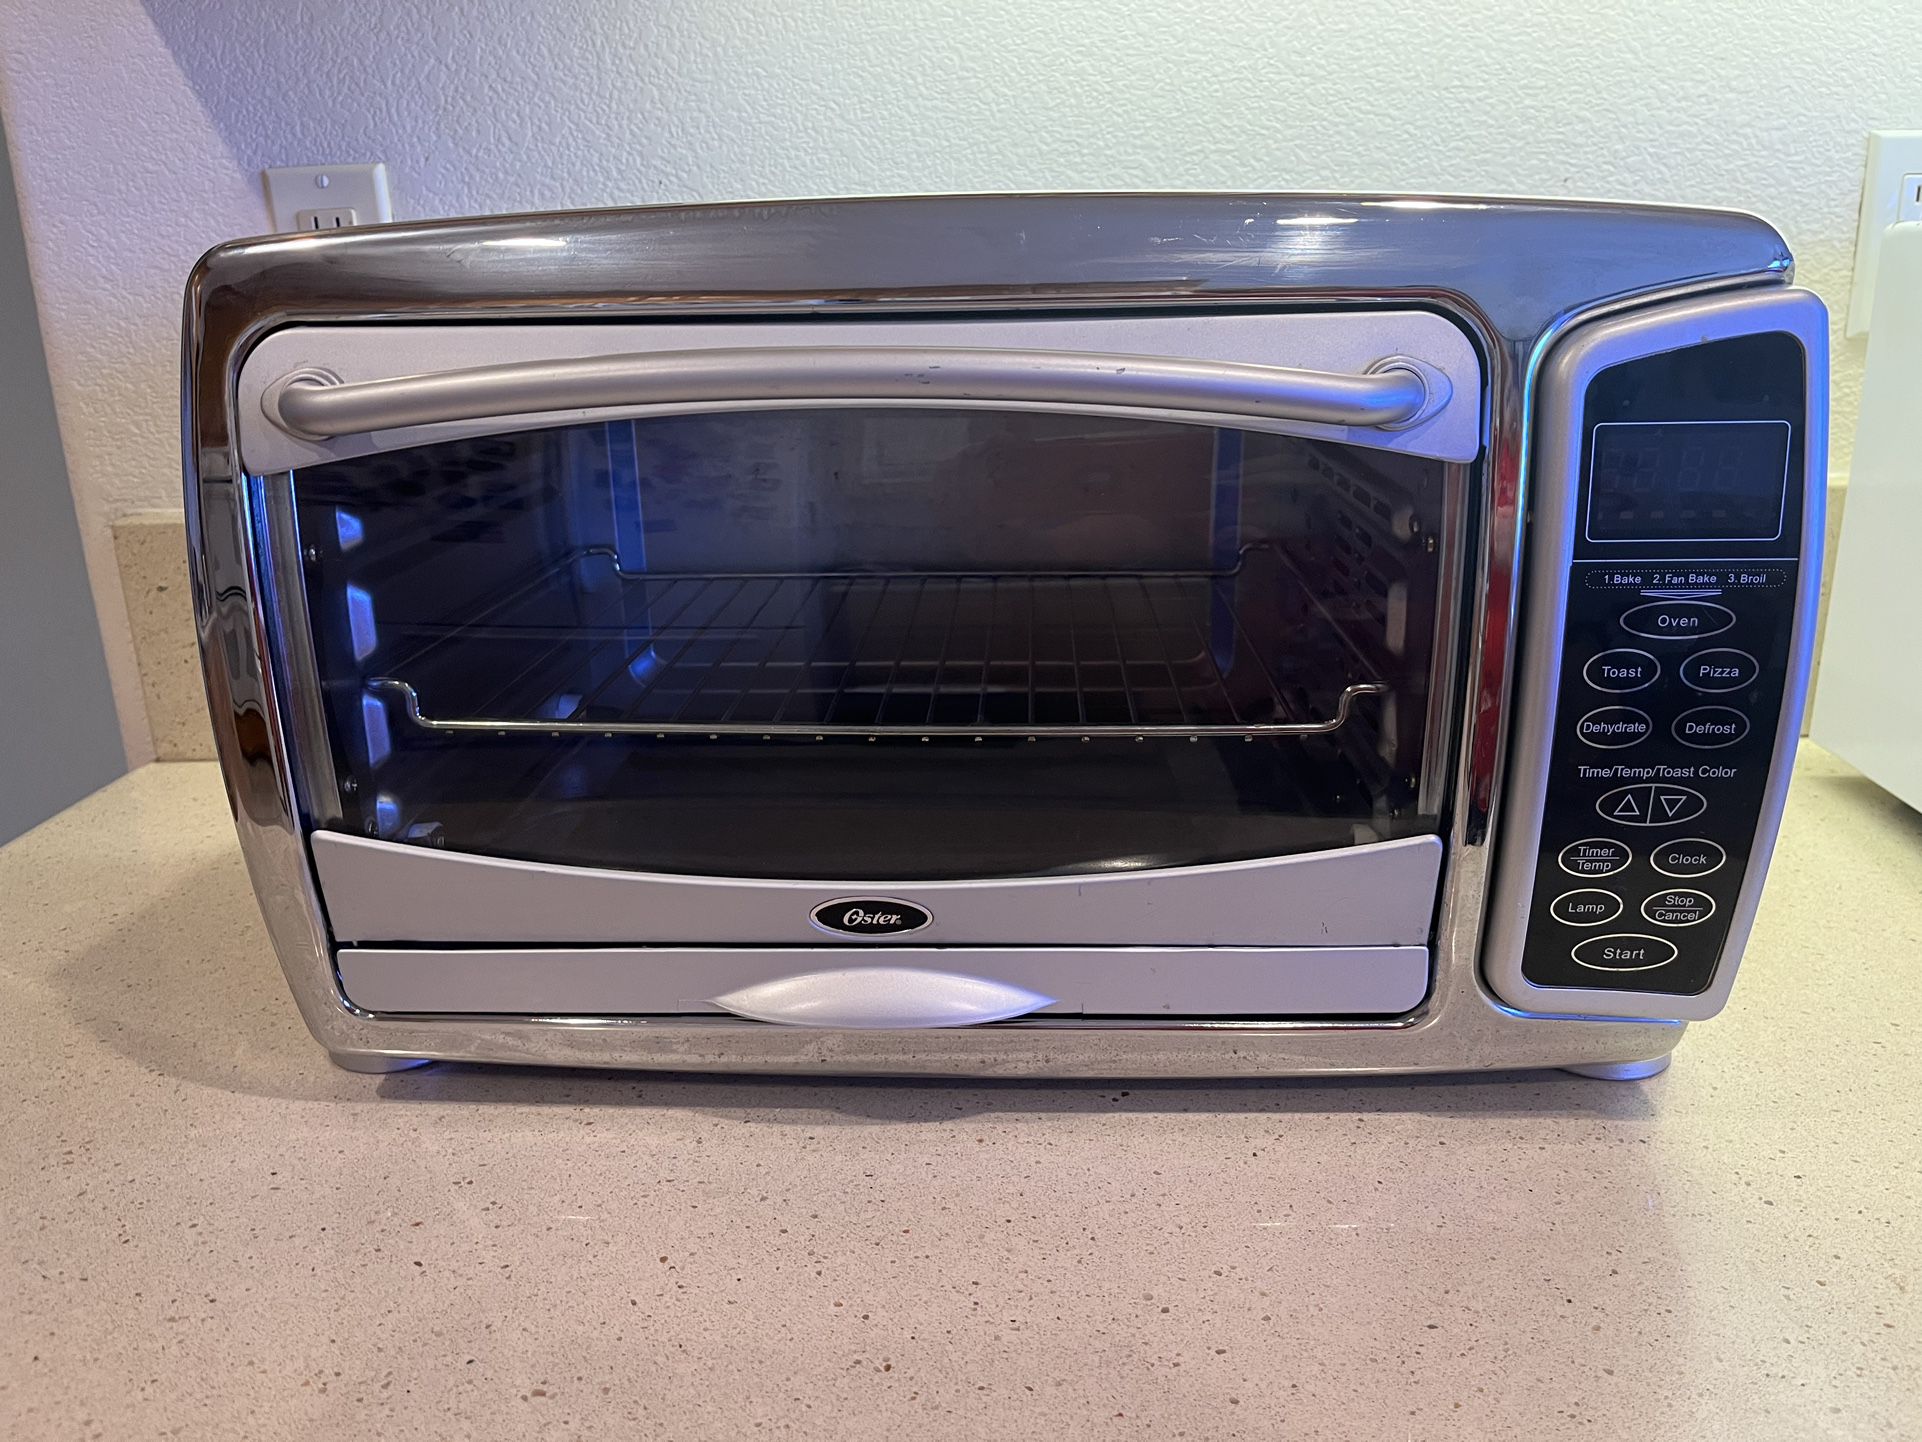 Oster Convection Oven, 8-in-1 Countertop Toaster Oven, XL Fits 2 16  Pizzas, Stainless Steel French Door for Sale in Los Angeles, CA - OfferUp